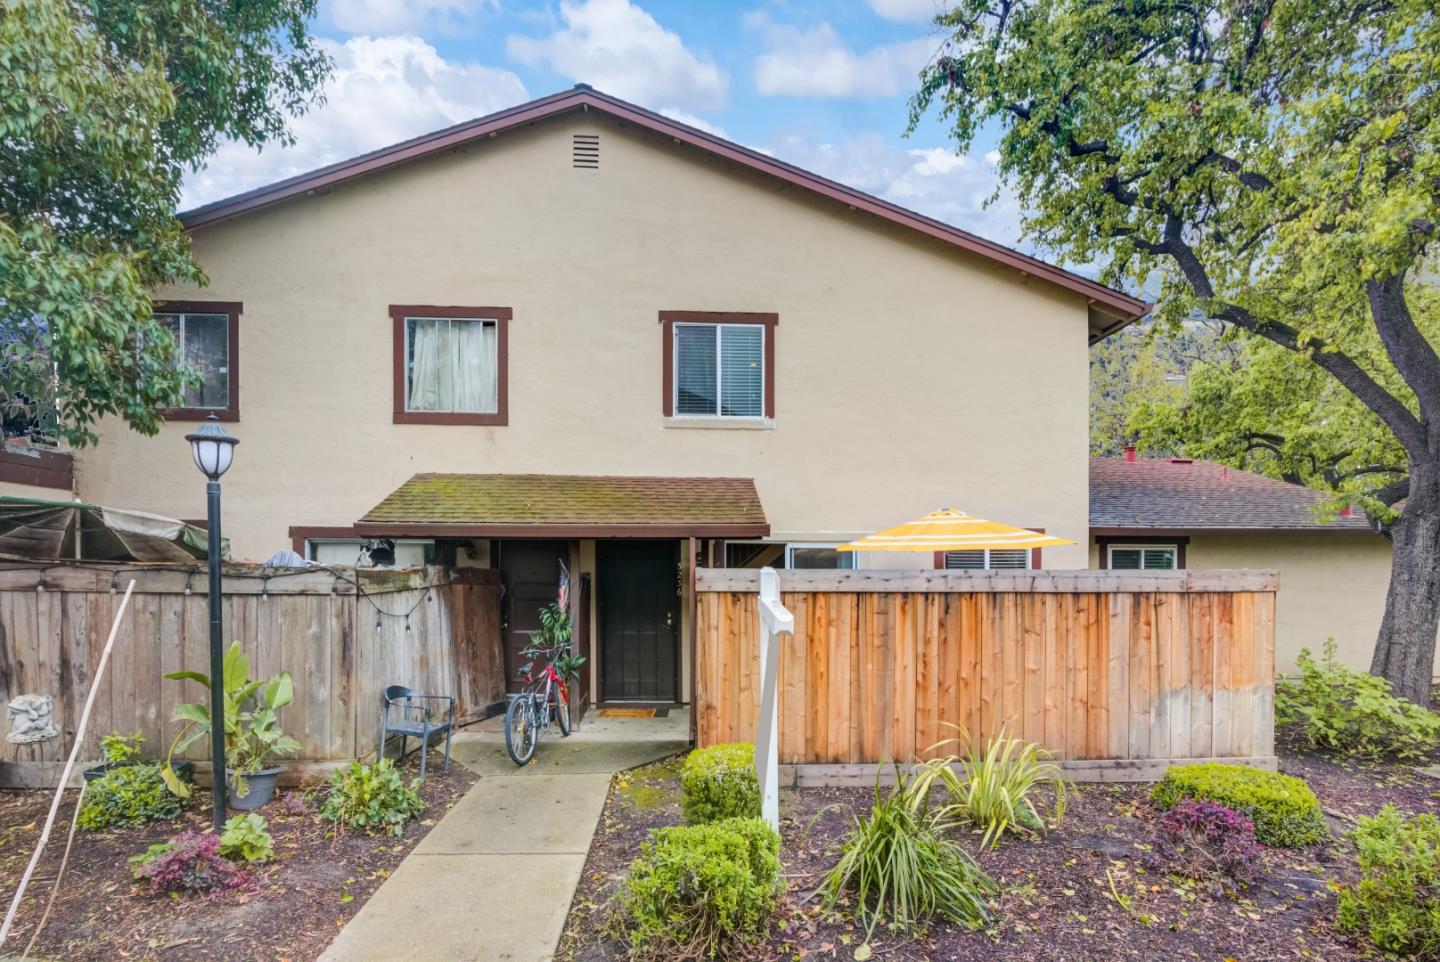 Photo of 3236 Parkhaven Dr in San Jose, CA